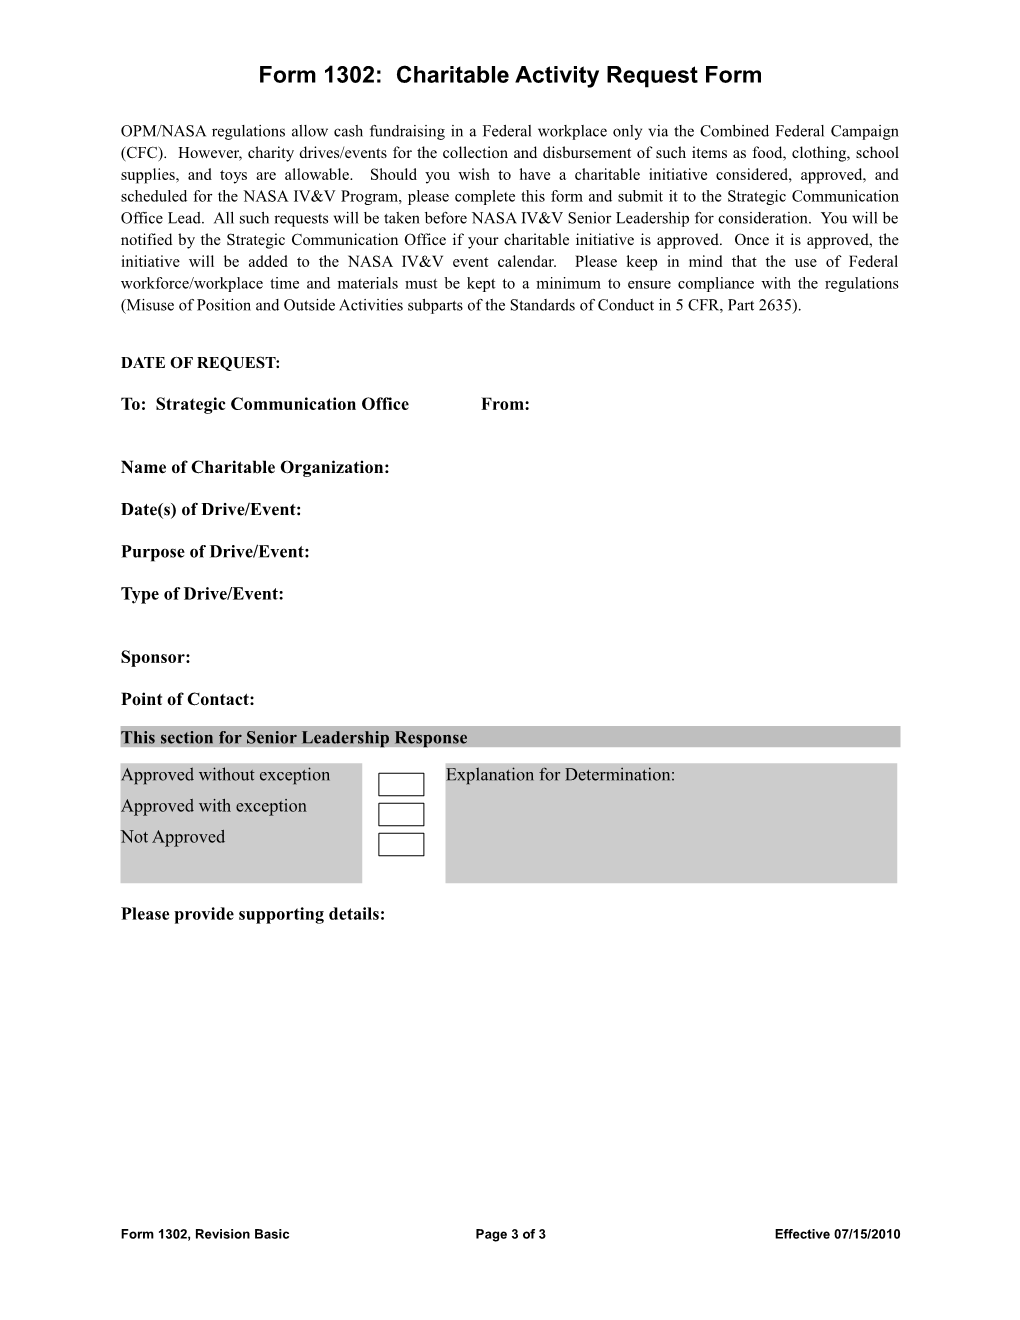 Form 1302: Charitable Activity Request Form